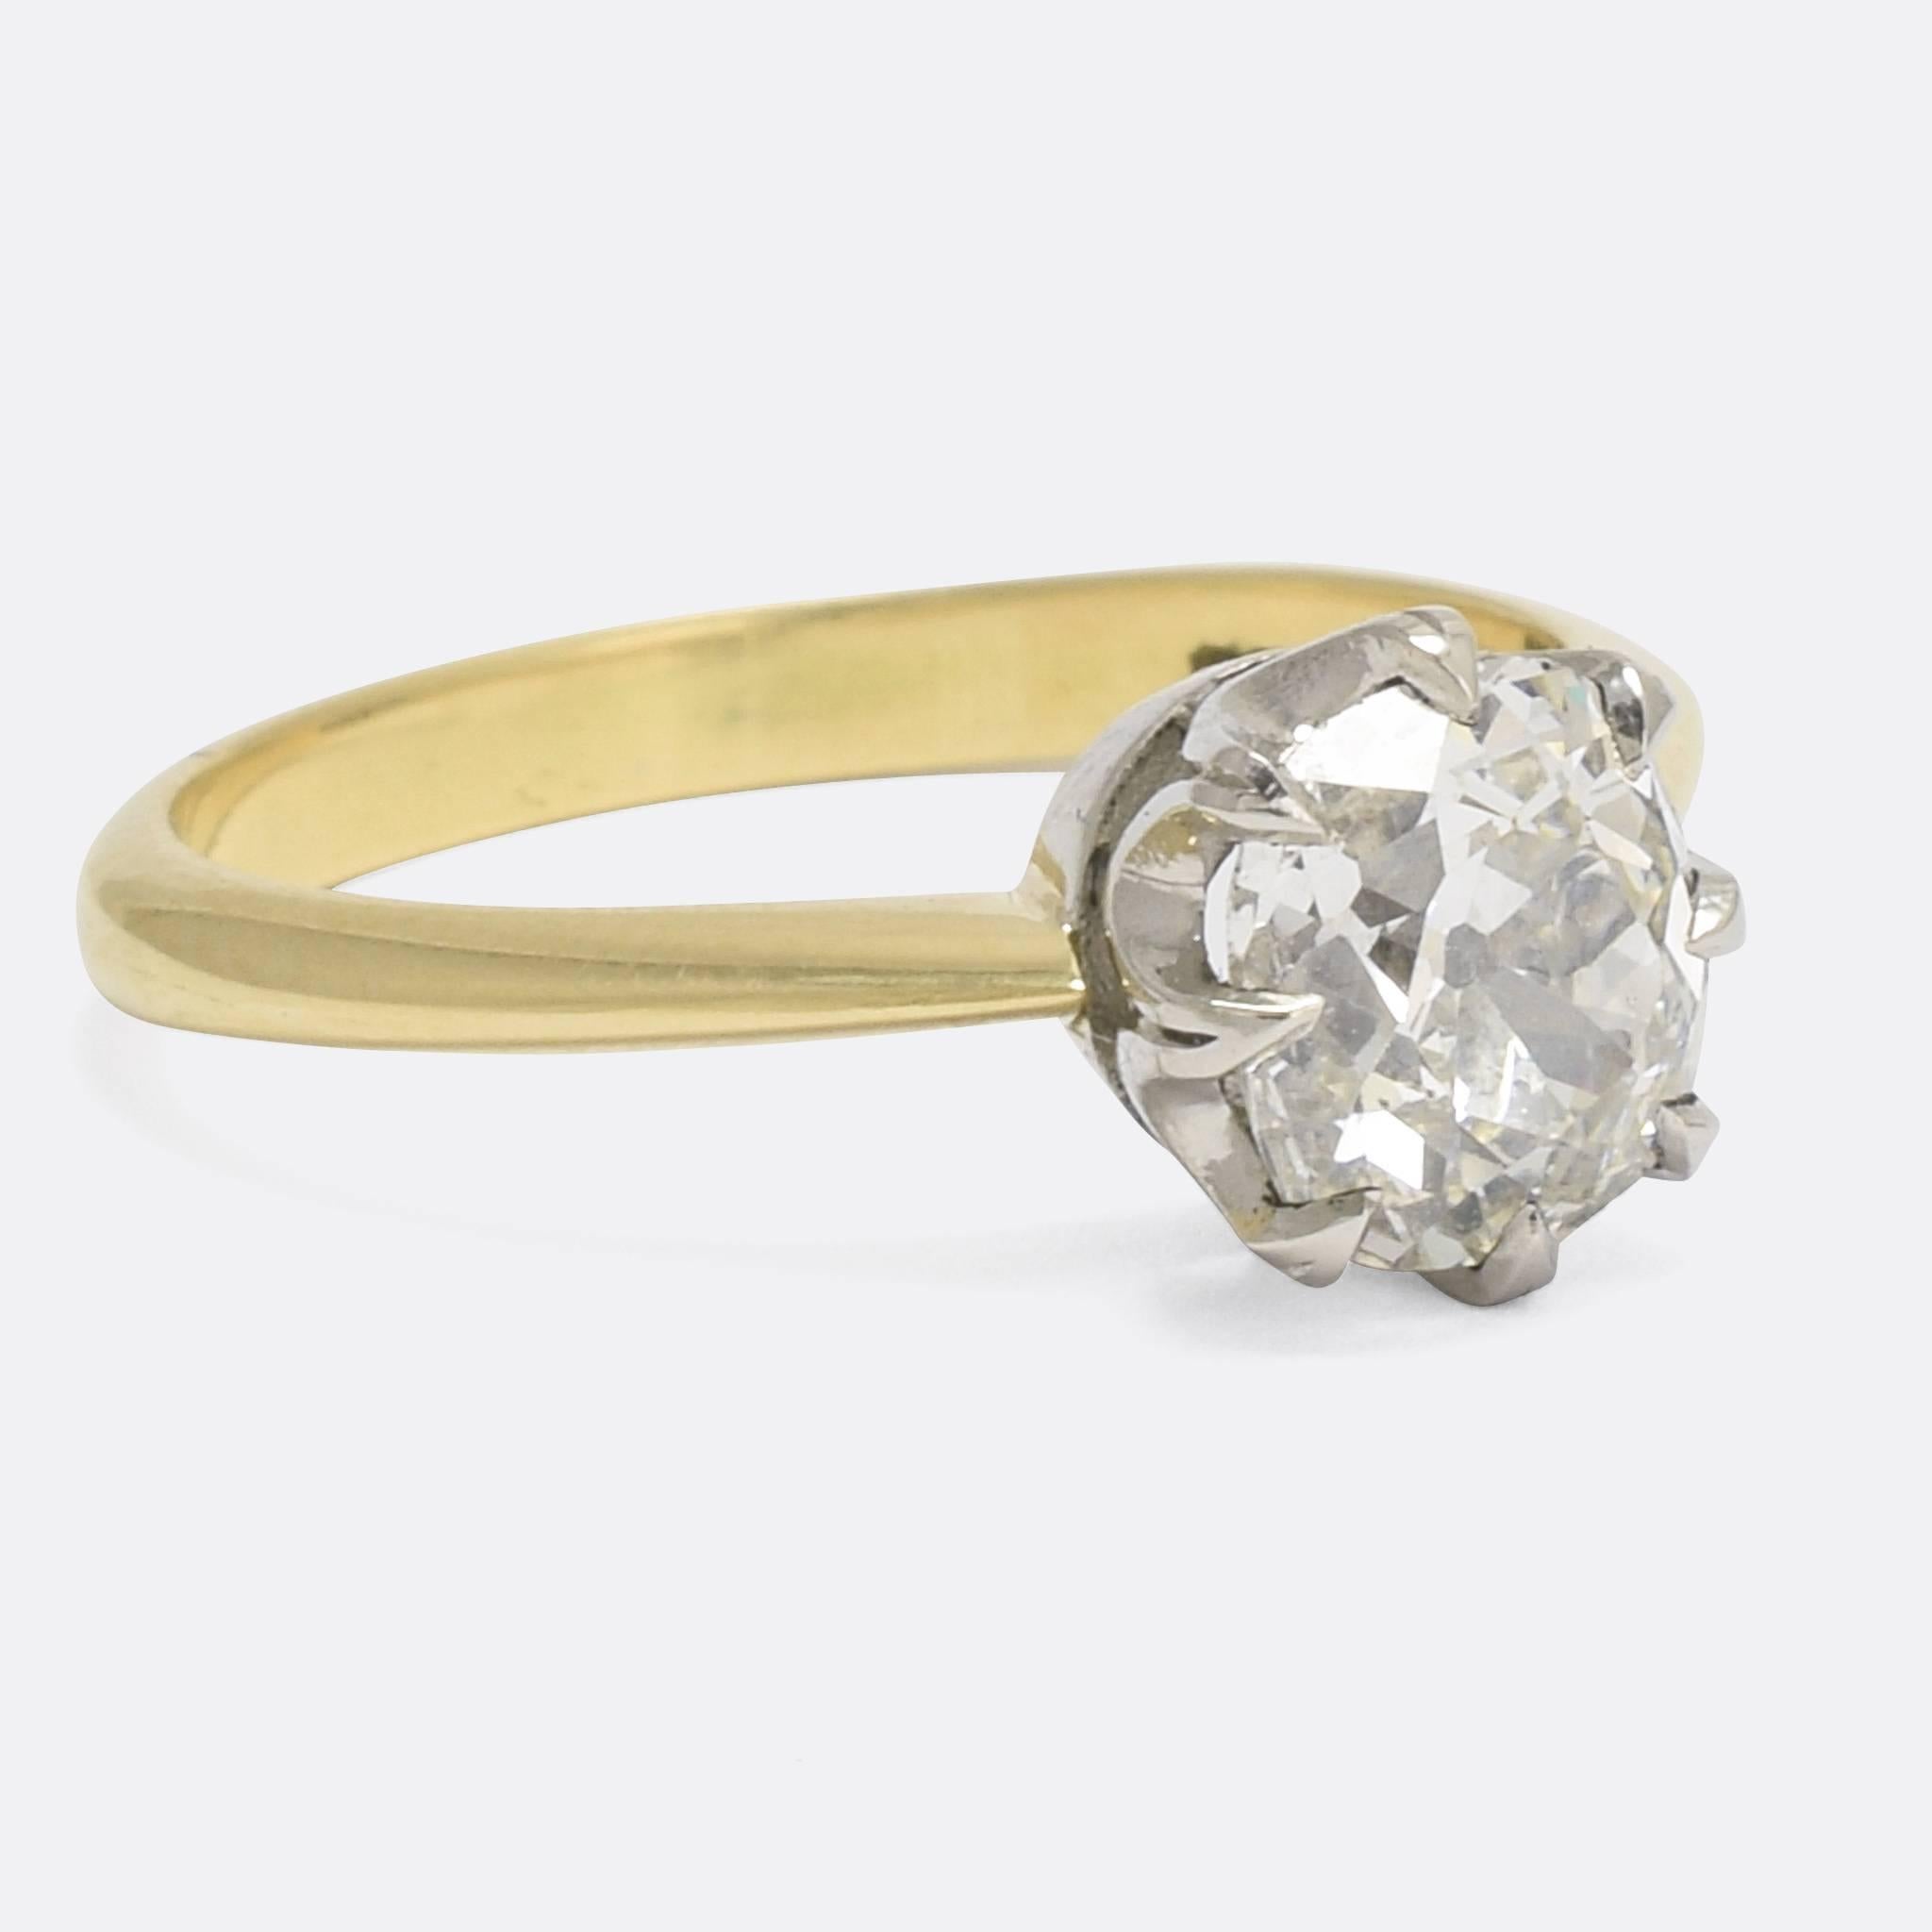 A stunning antique engagement ring set with a beautiful antique cushion cut diamond in a classic eight-claw mount. The stone is 1.69 carats in weight, and grades at G colour with VS1 clarity. Modelled in 18 karat gold with a platinum head, it would